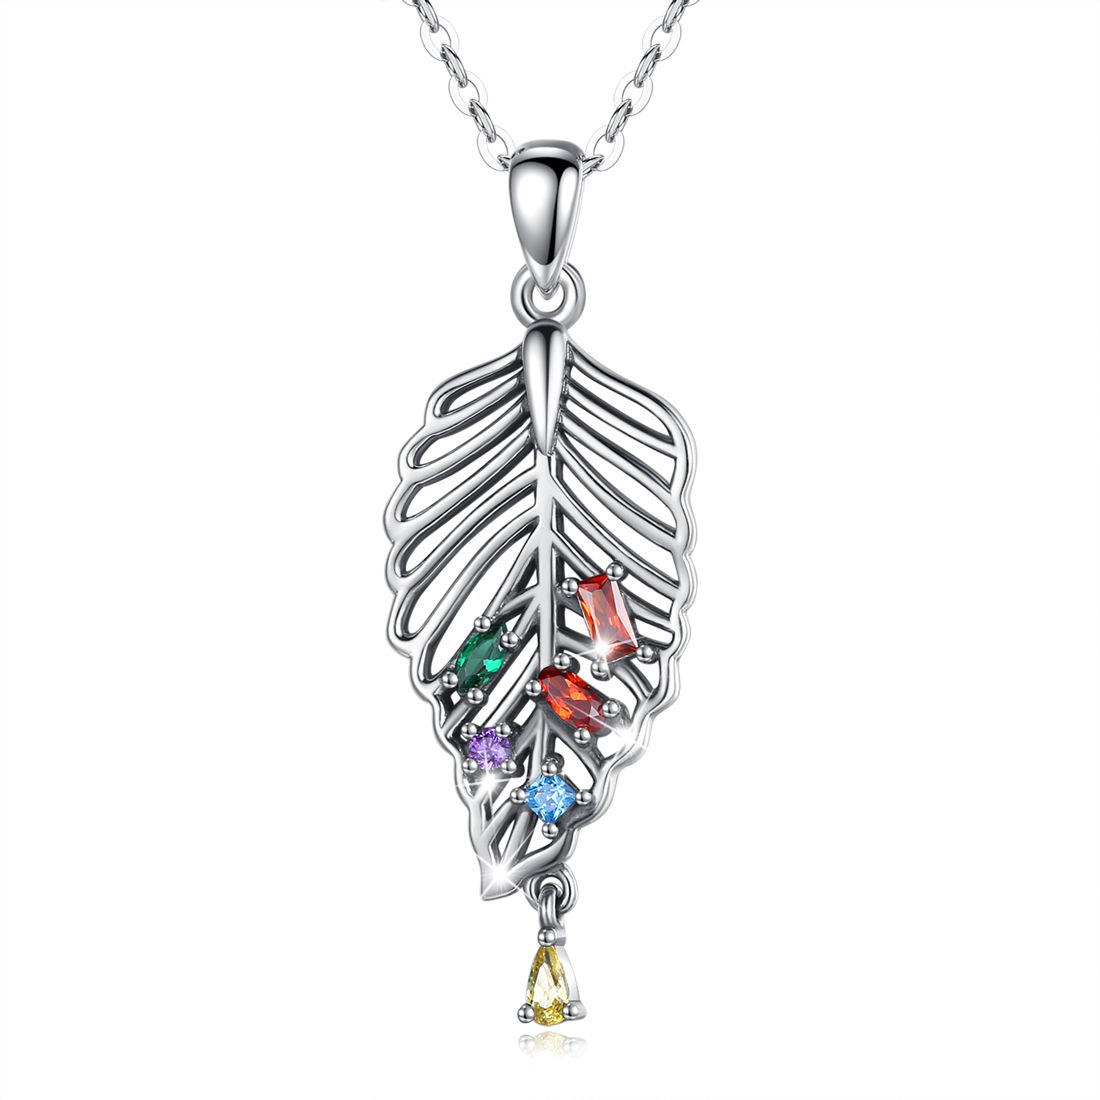 Merryshine Jewelry New Design S925 Sterling Silver Leaf Necklace With Colorful Cubic Zirconia